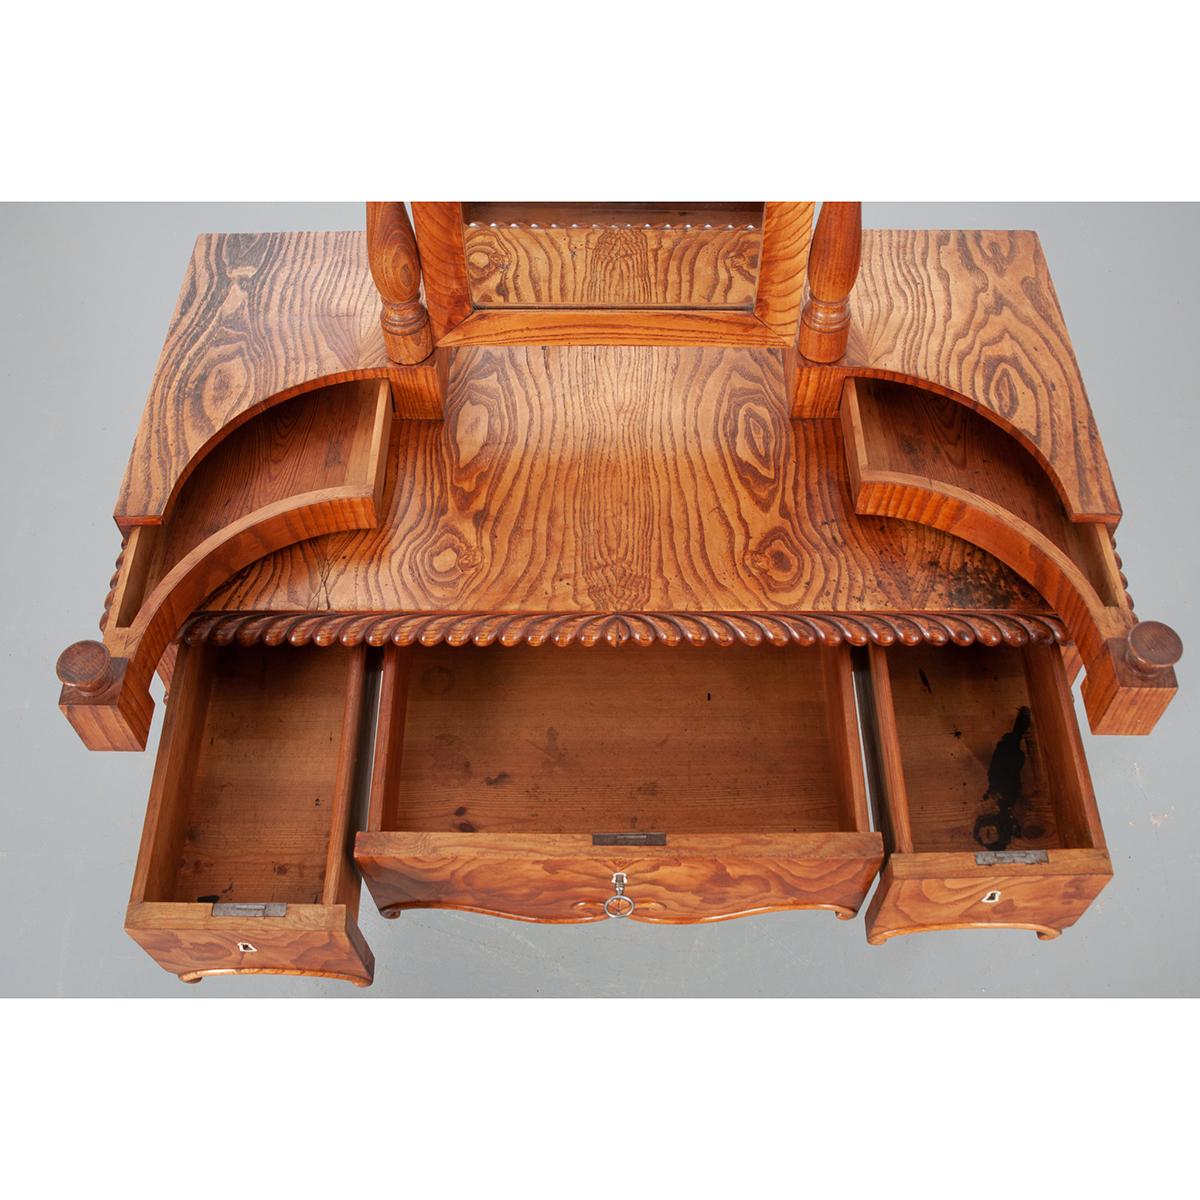 This pine dressing table has bold wood grain and is ideal to start your vanity routine. The surface is at 30-?” H with a pivoting mirror and five drawers. The mirror is 20-?” H x 13-?” W x ¾” D and is held between two turned posts. There are two,